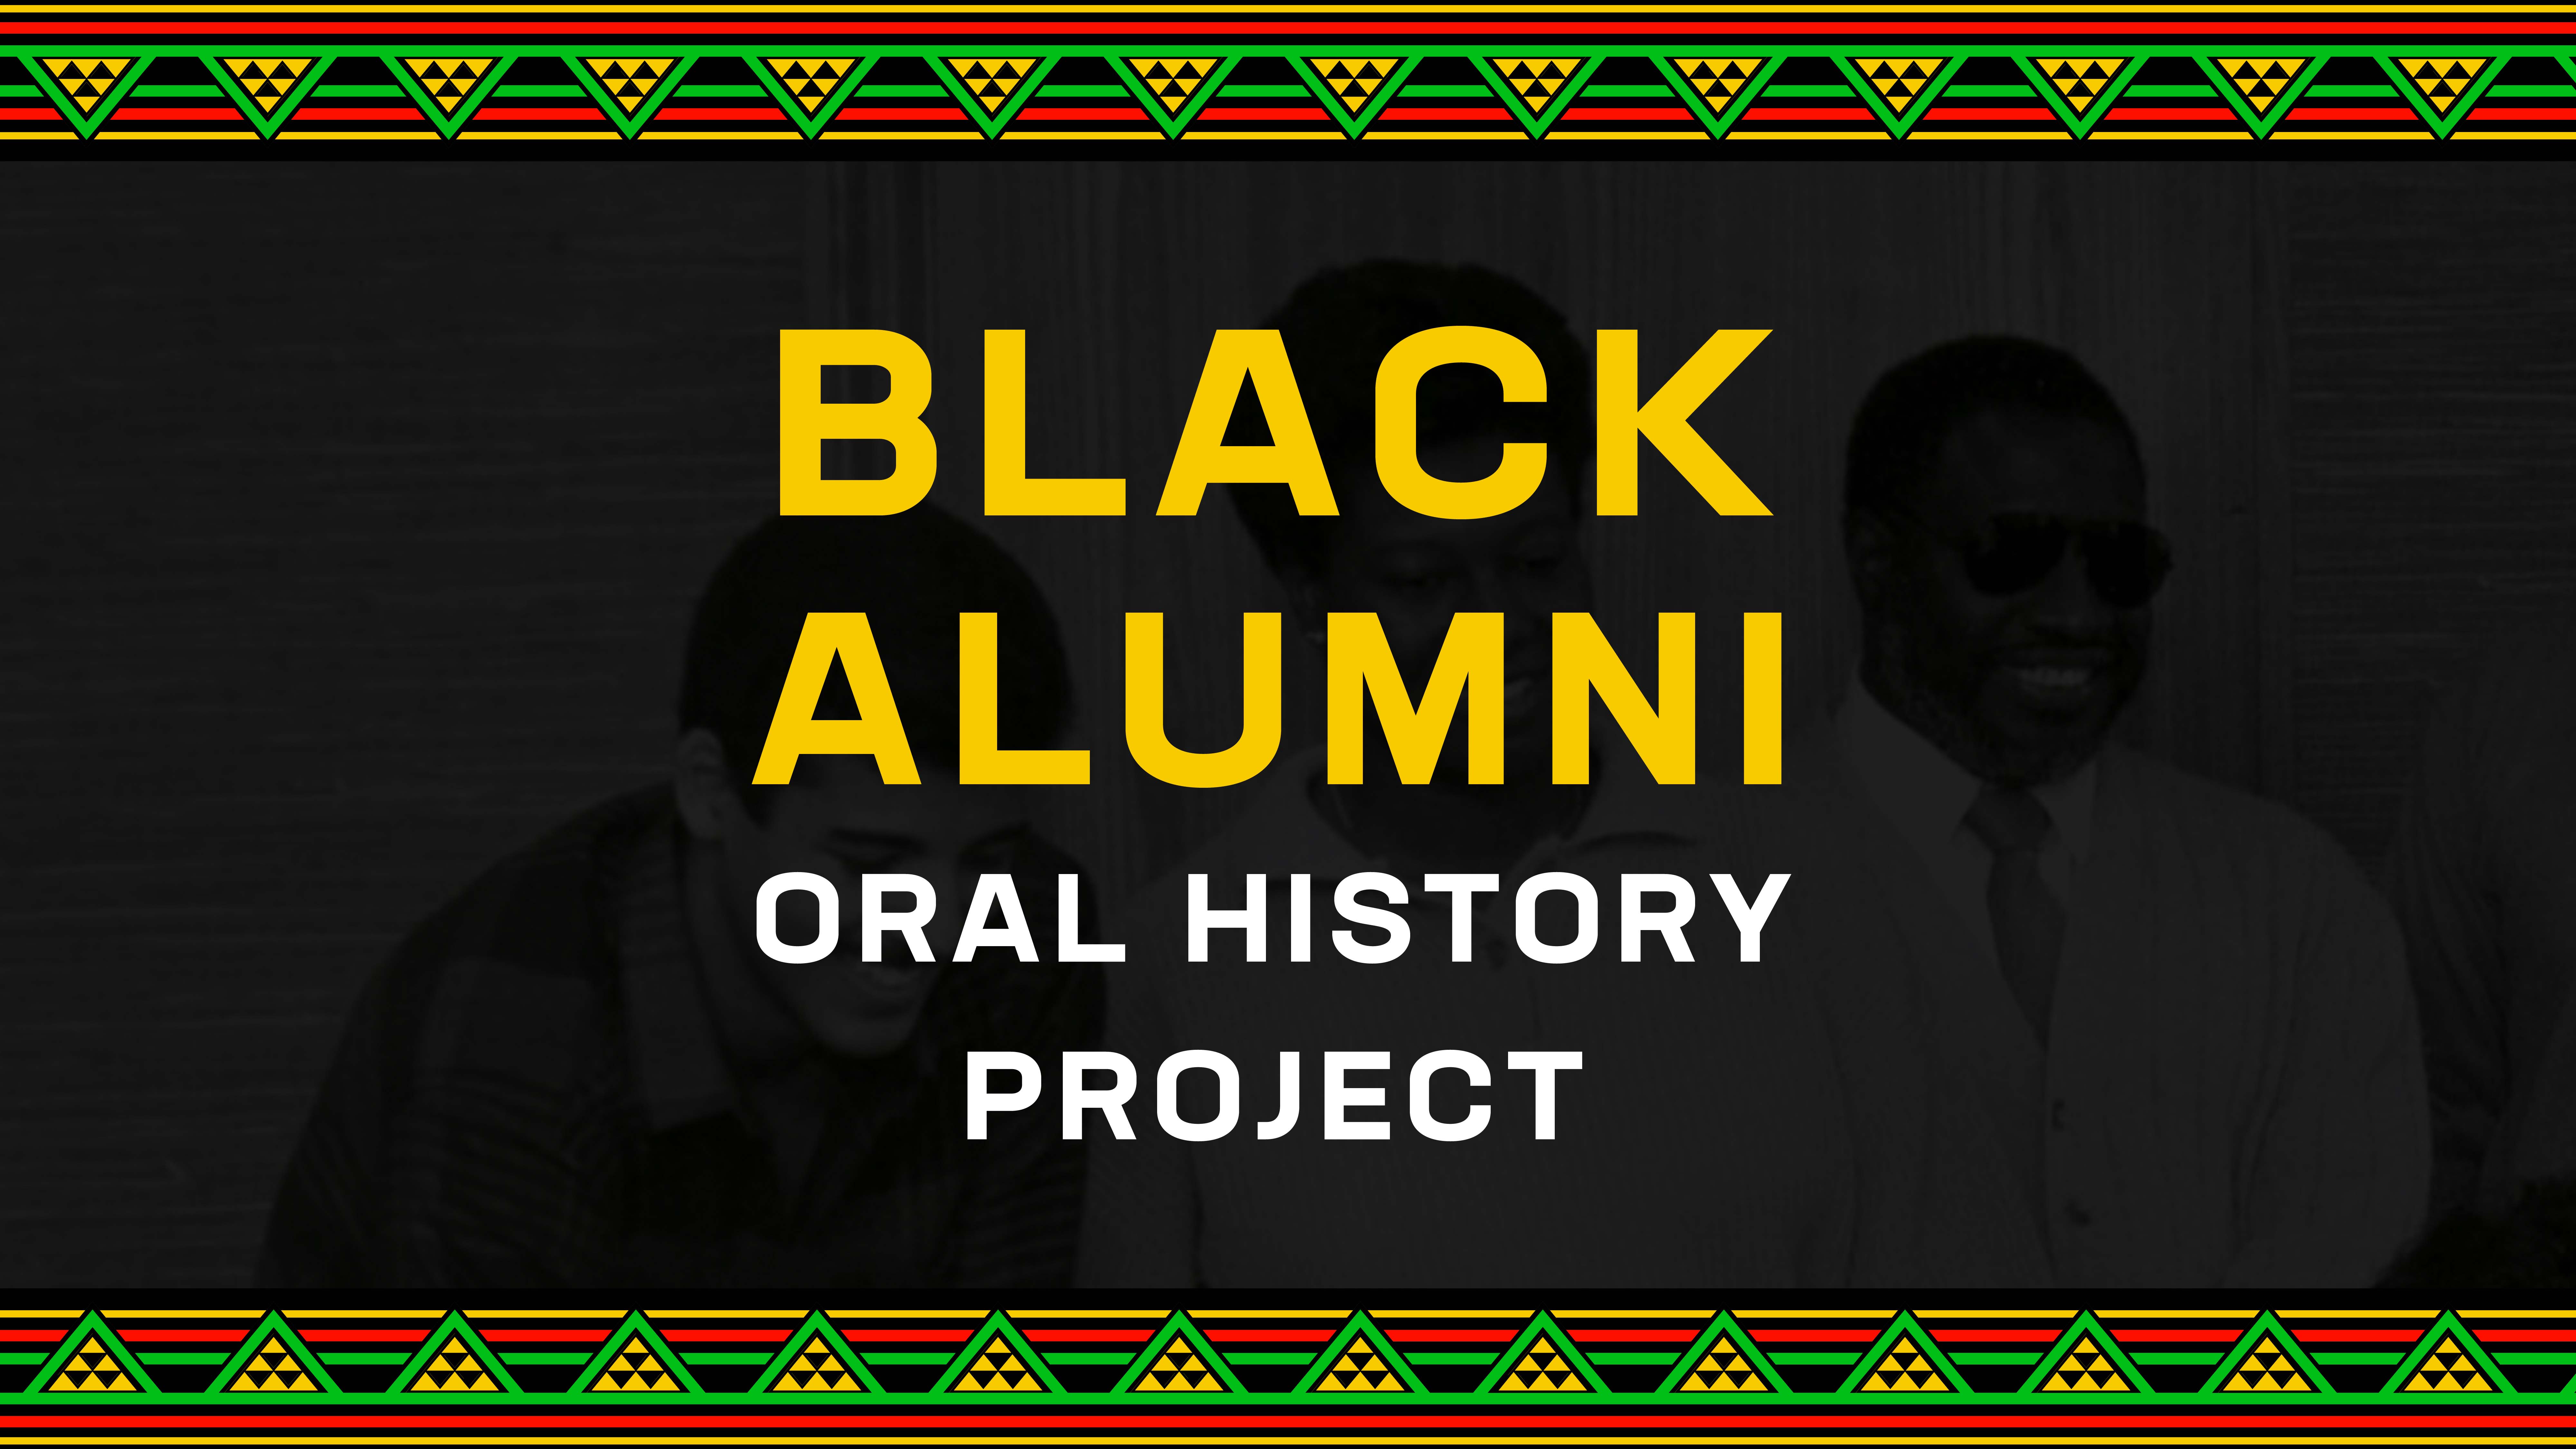 "Black Alumni Oral History Project" yellow and white on black background and green, red, and yellow border design 